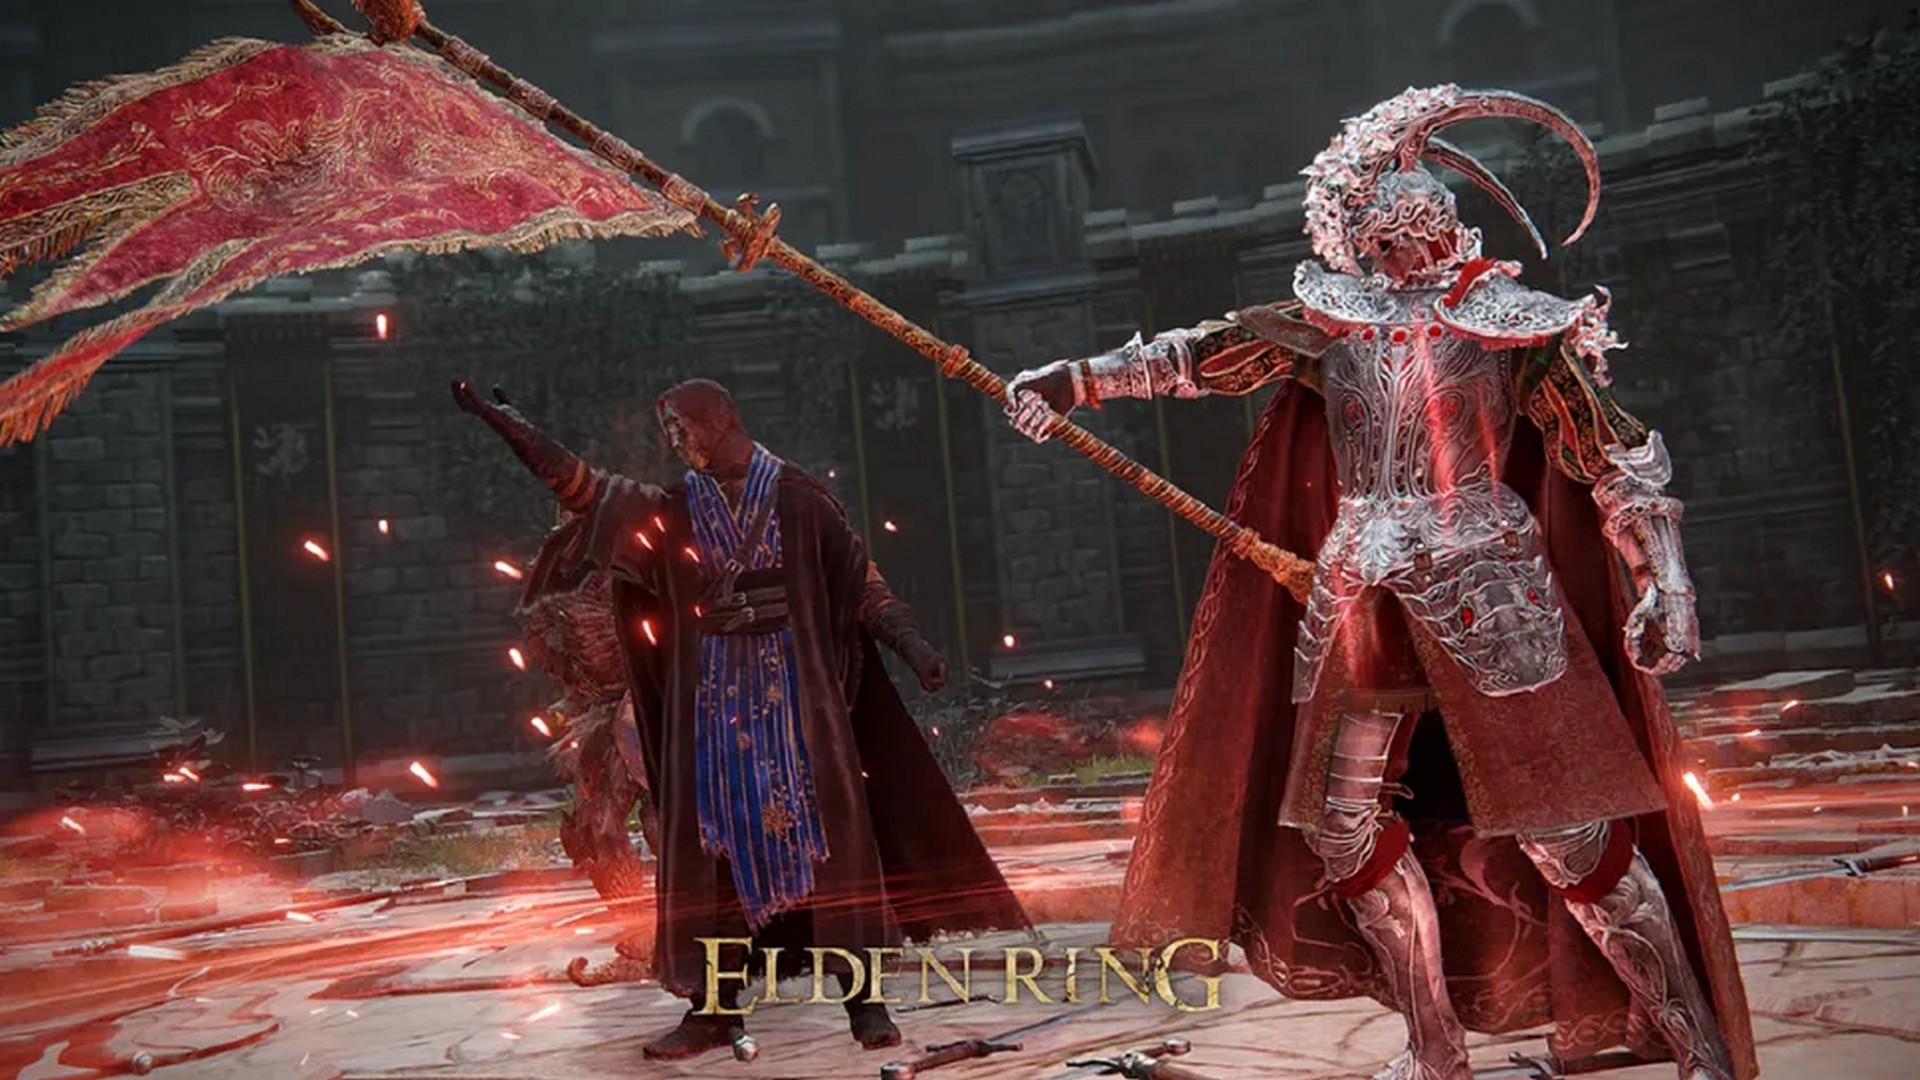 Return To The Lands Between With The Free Elden Ring DLC Adding New PVP Features & Character Customization